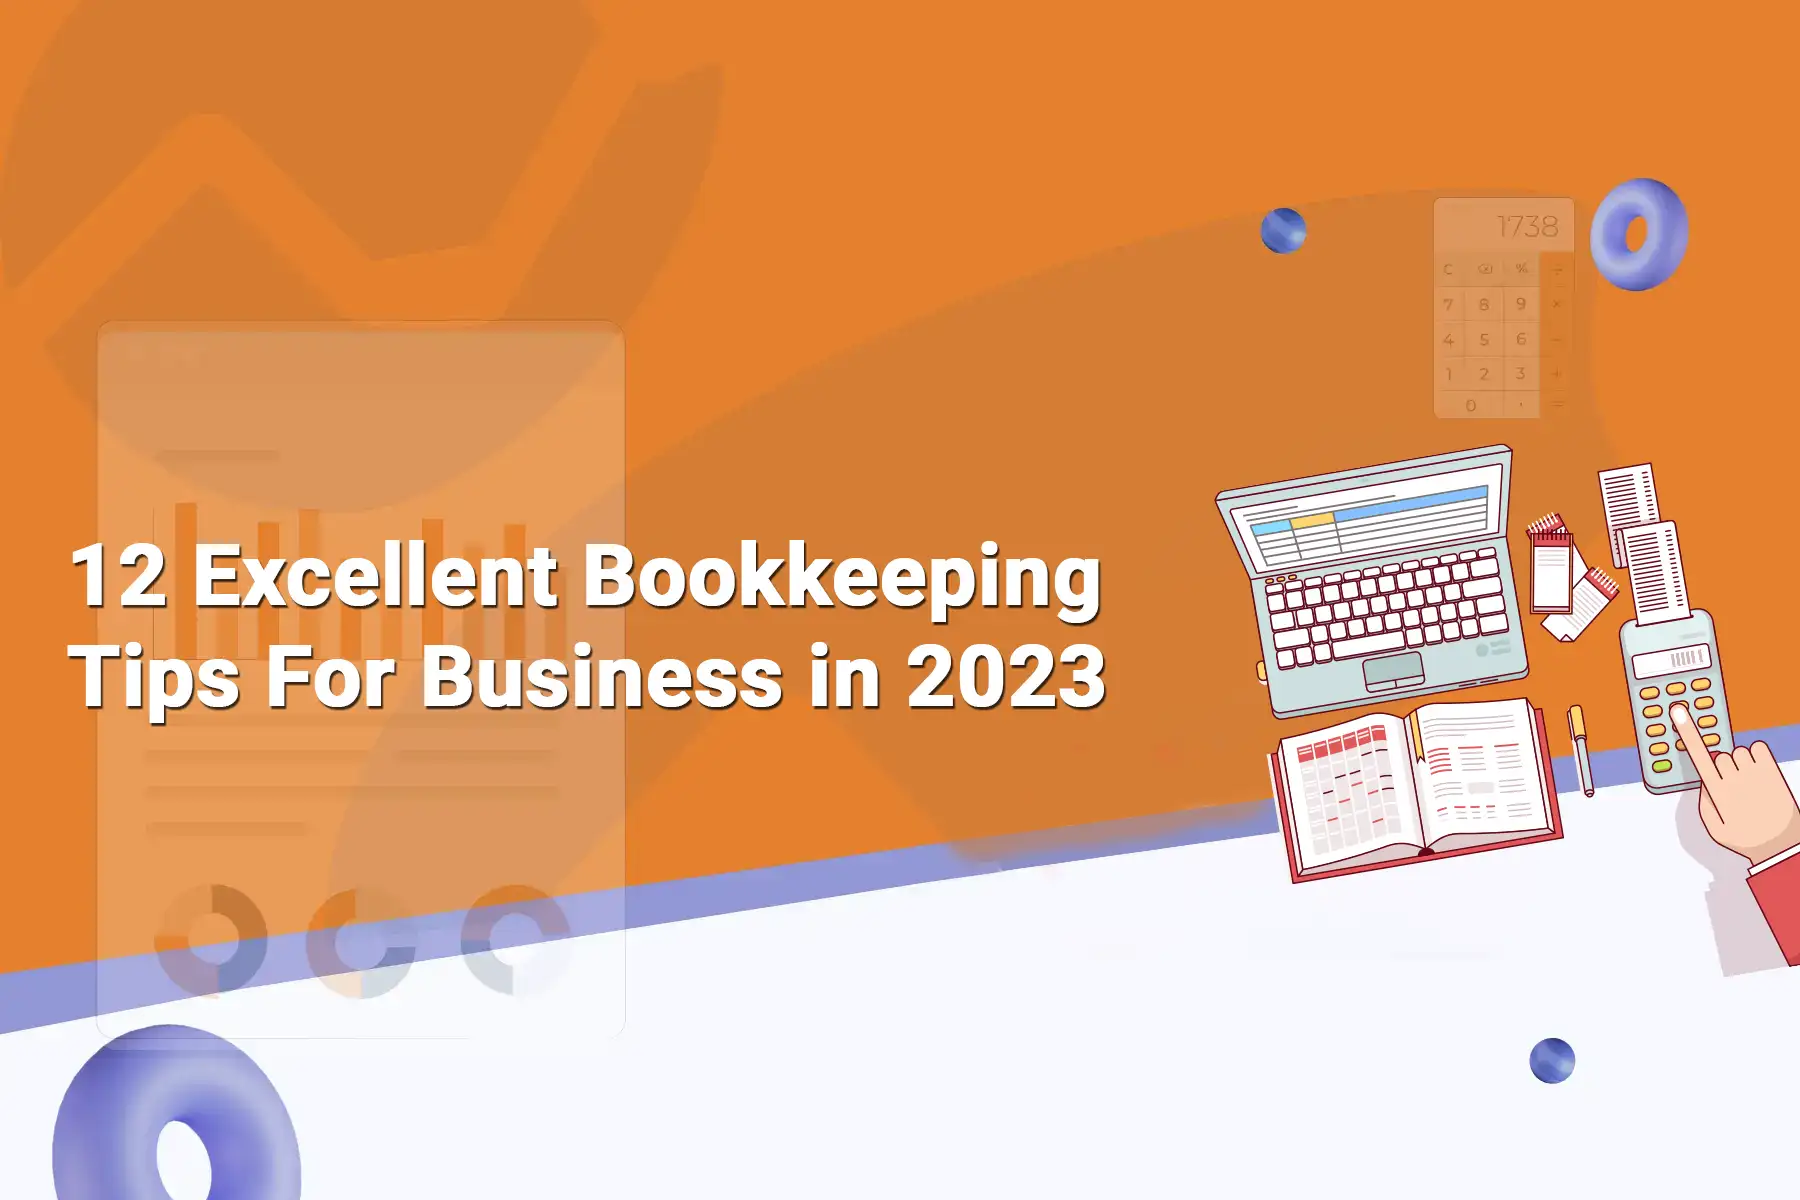 12 Excellent bookkeeping tips for business in 2023